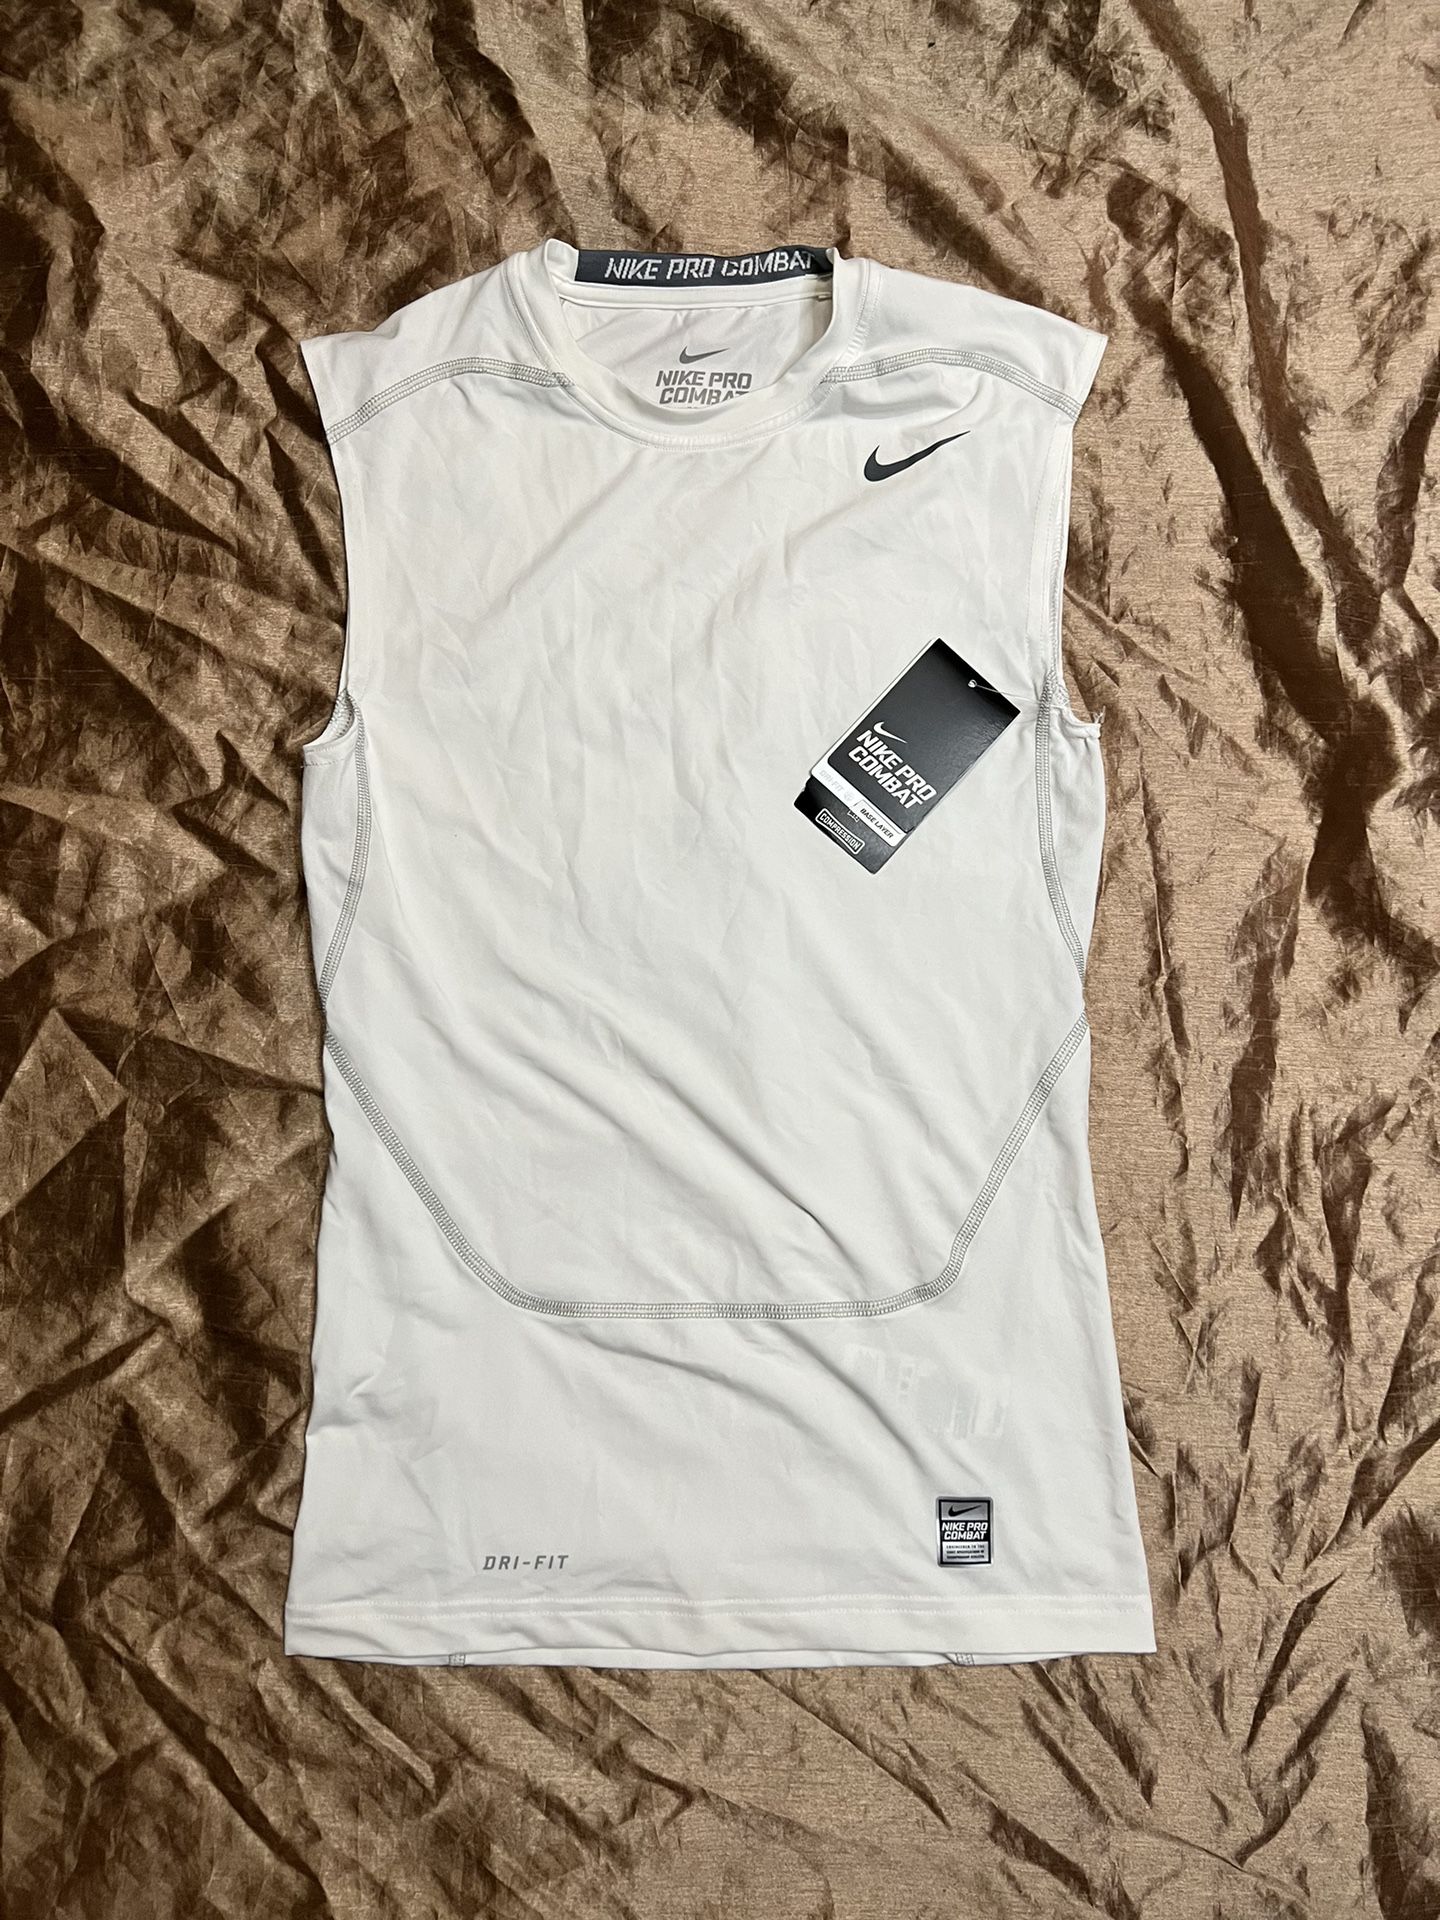 Men's Medium Nike Pro Combat Dri-Fit Compression white sleeveless fitted shi for Sale in Artesia, - OfferUp